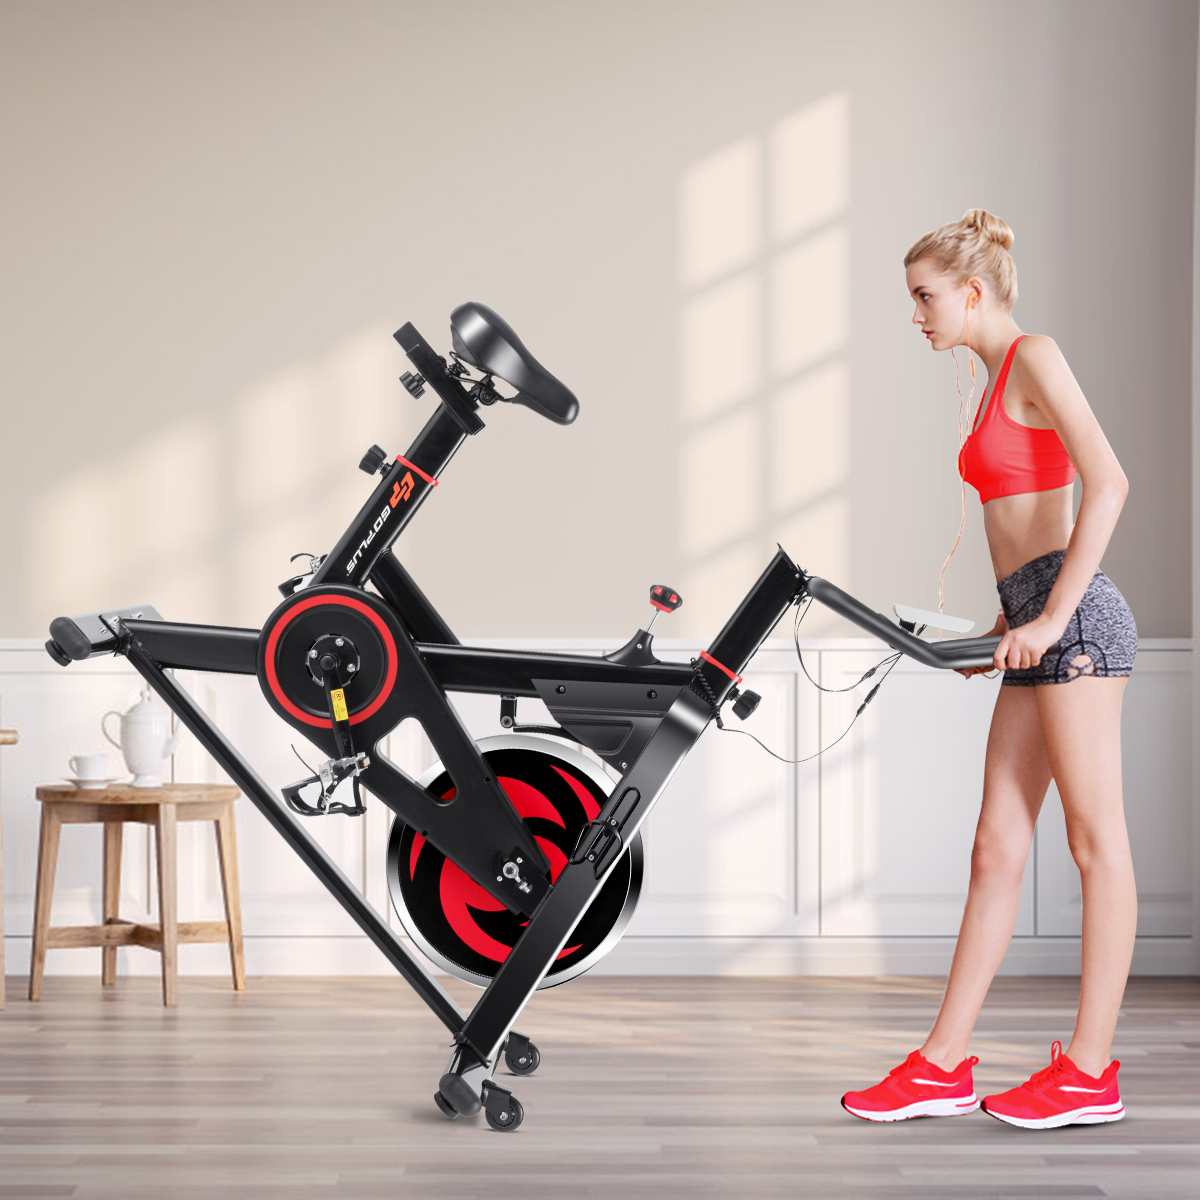 Stationary Exercise Magnetic Cycling Bike 30Lbs Flywheel Home Gym Cardio Workout - image 4 of 10